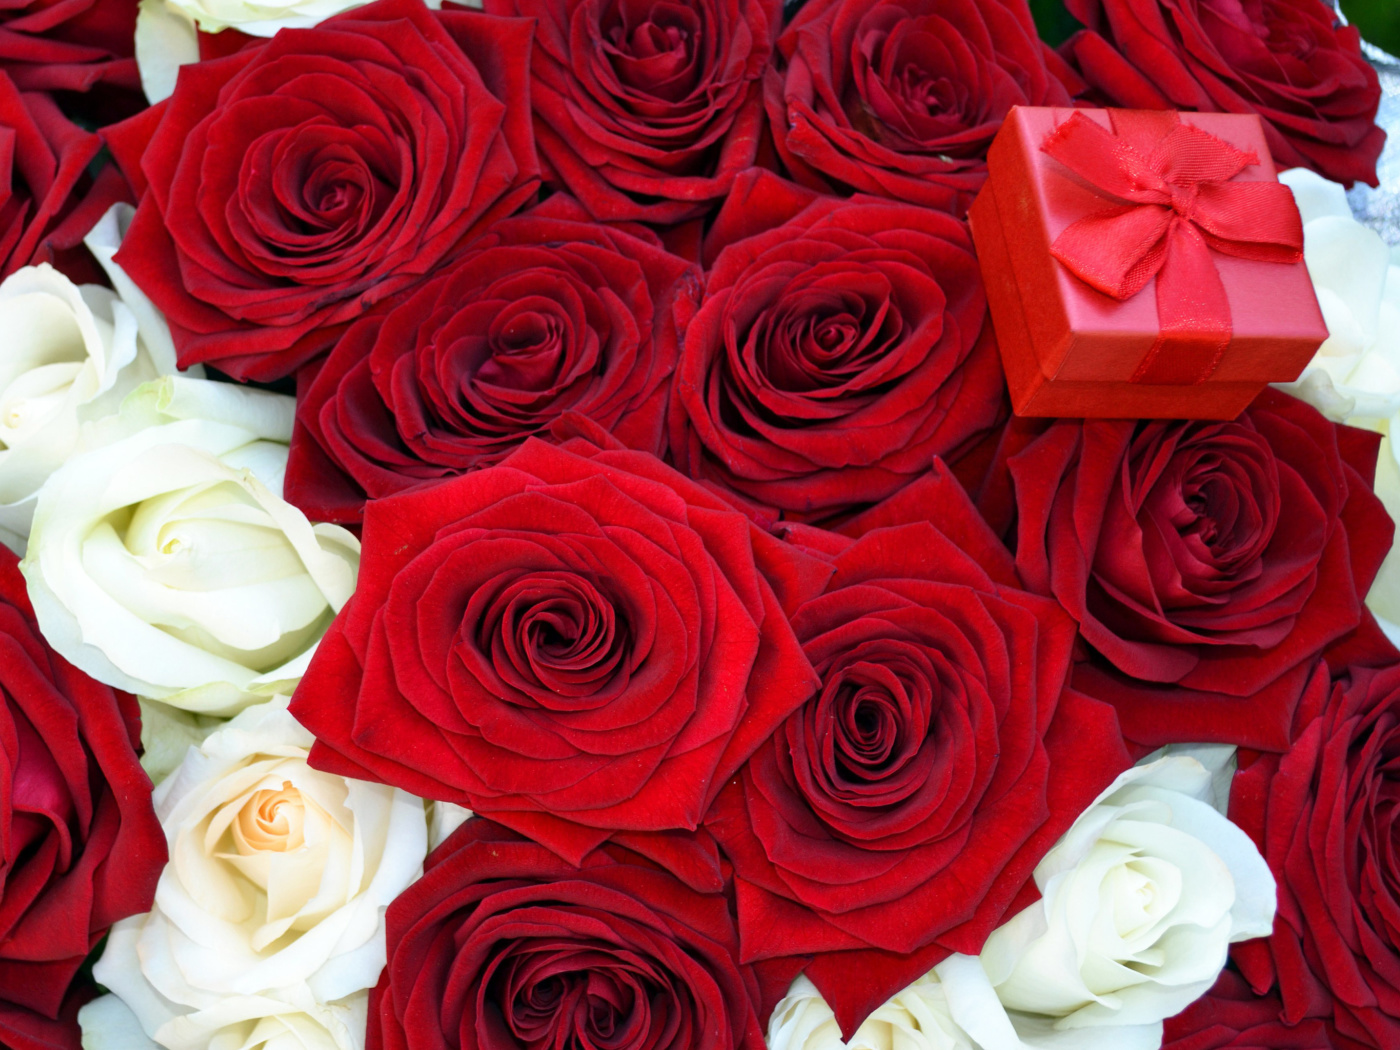 Das Roses for Propose Wallpaper 1400x1050